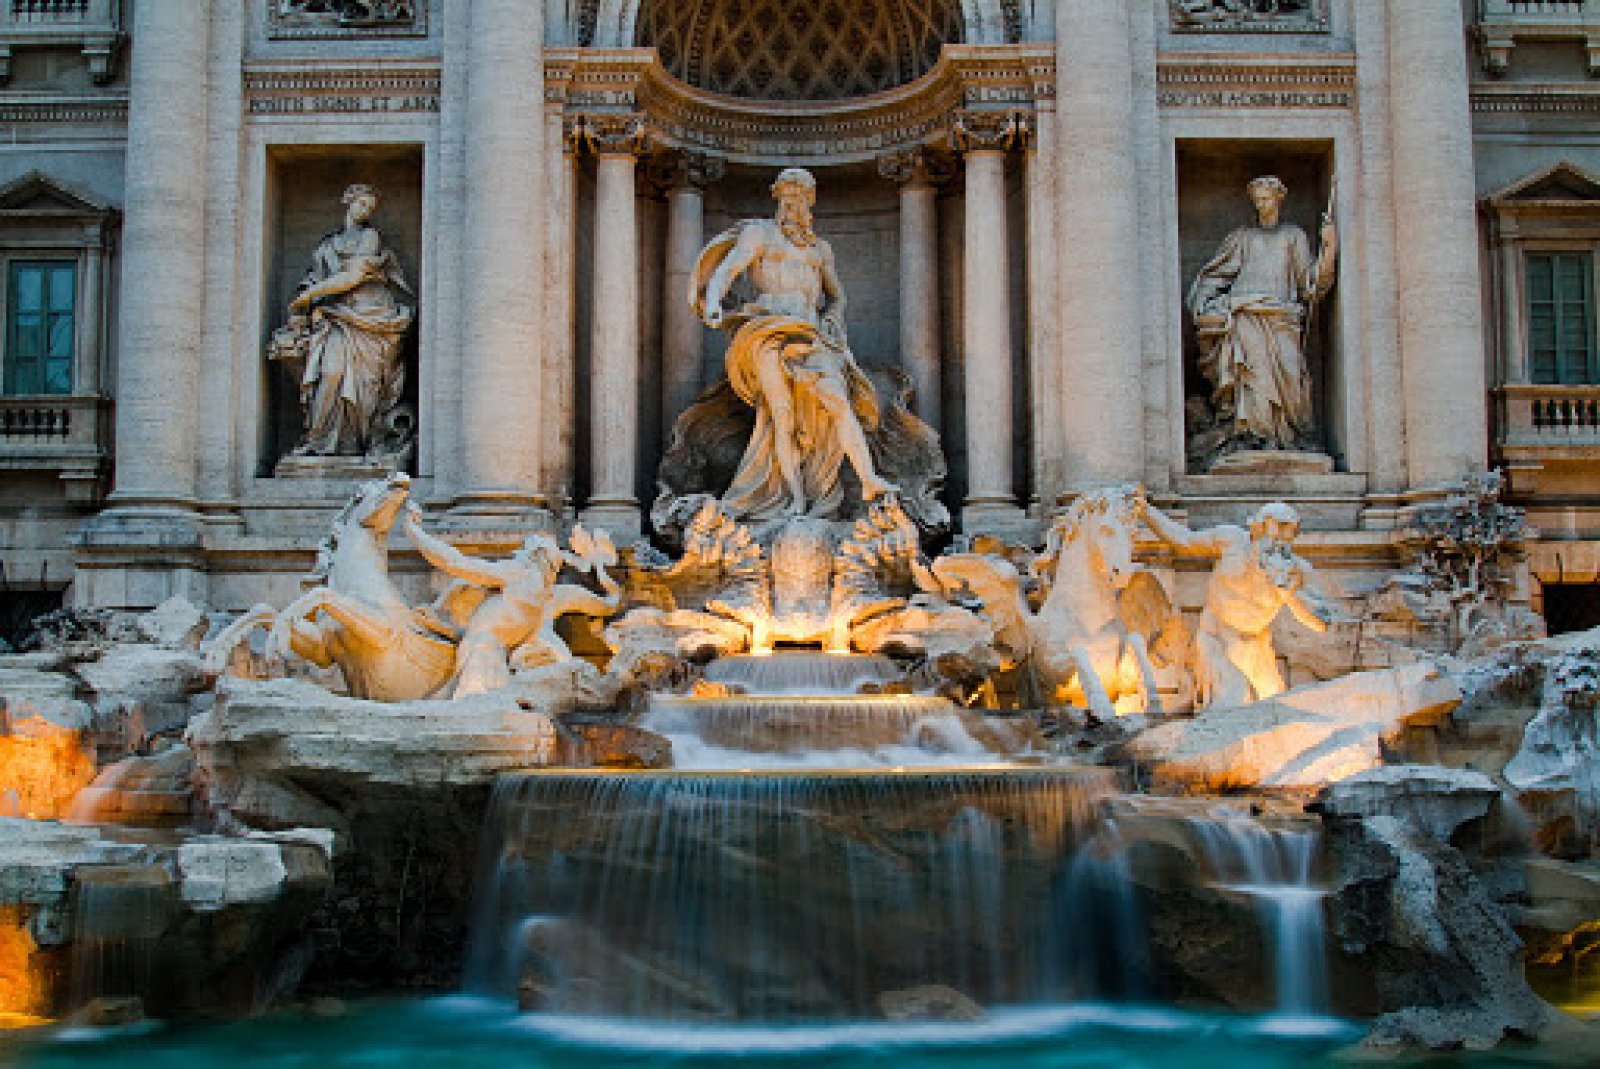 Romes Trevi Fountain Beauty And The Dirt